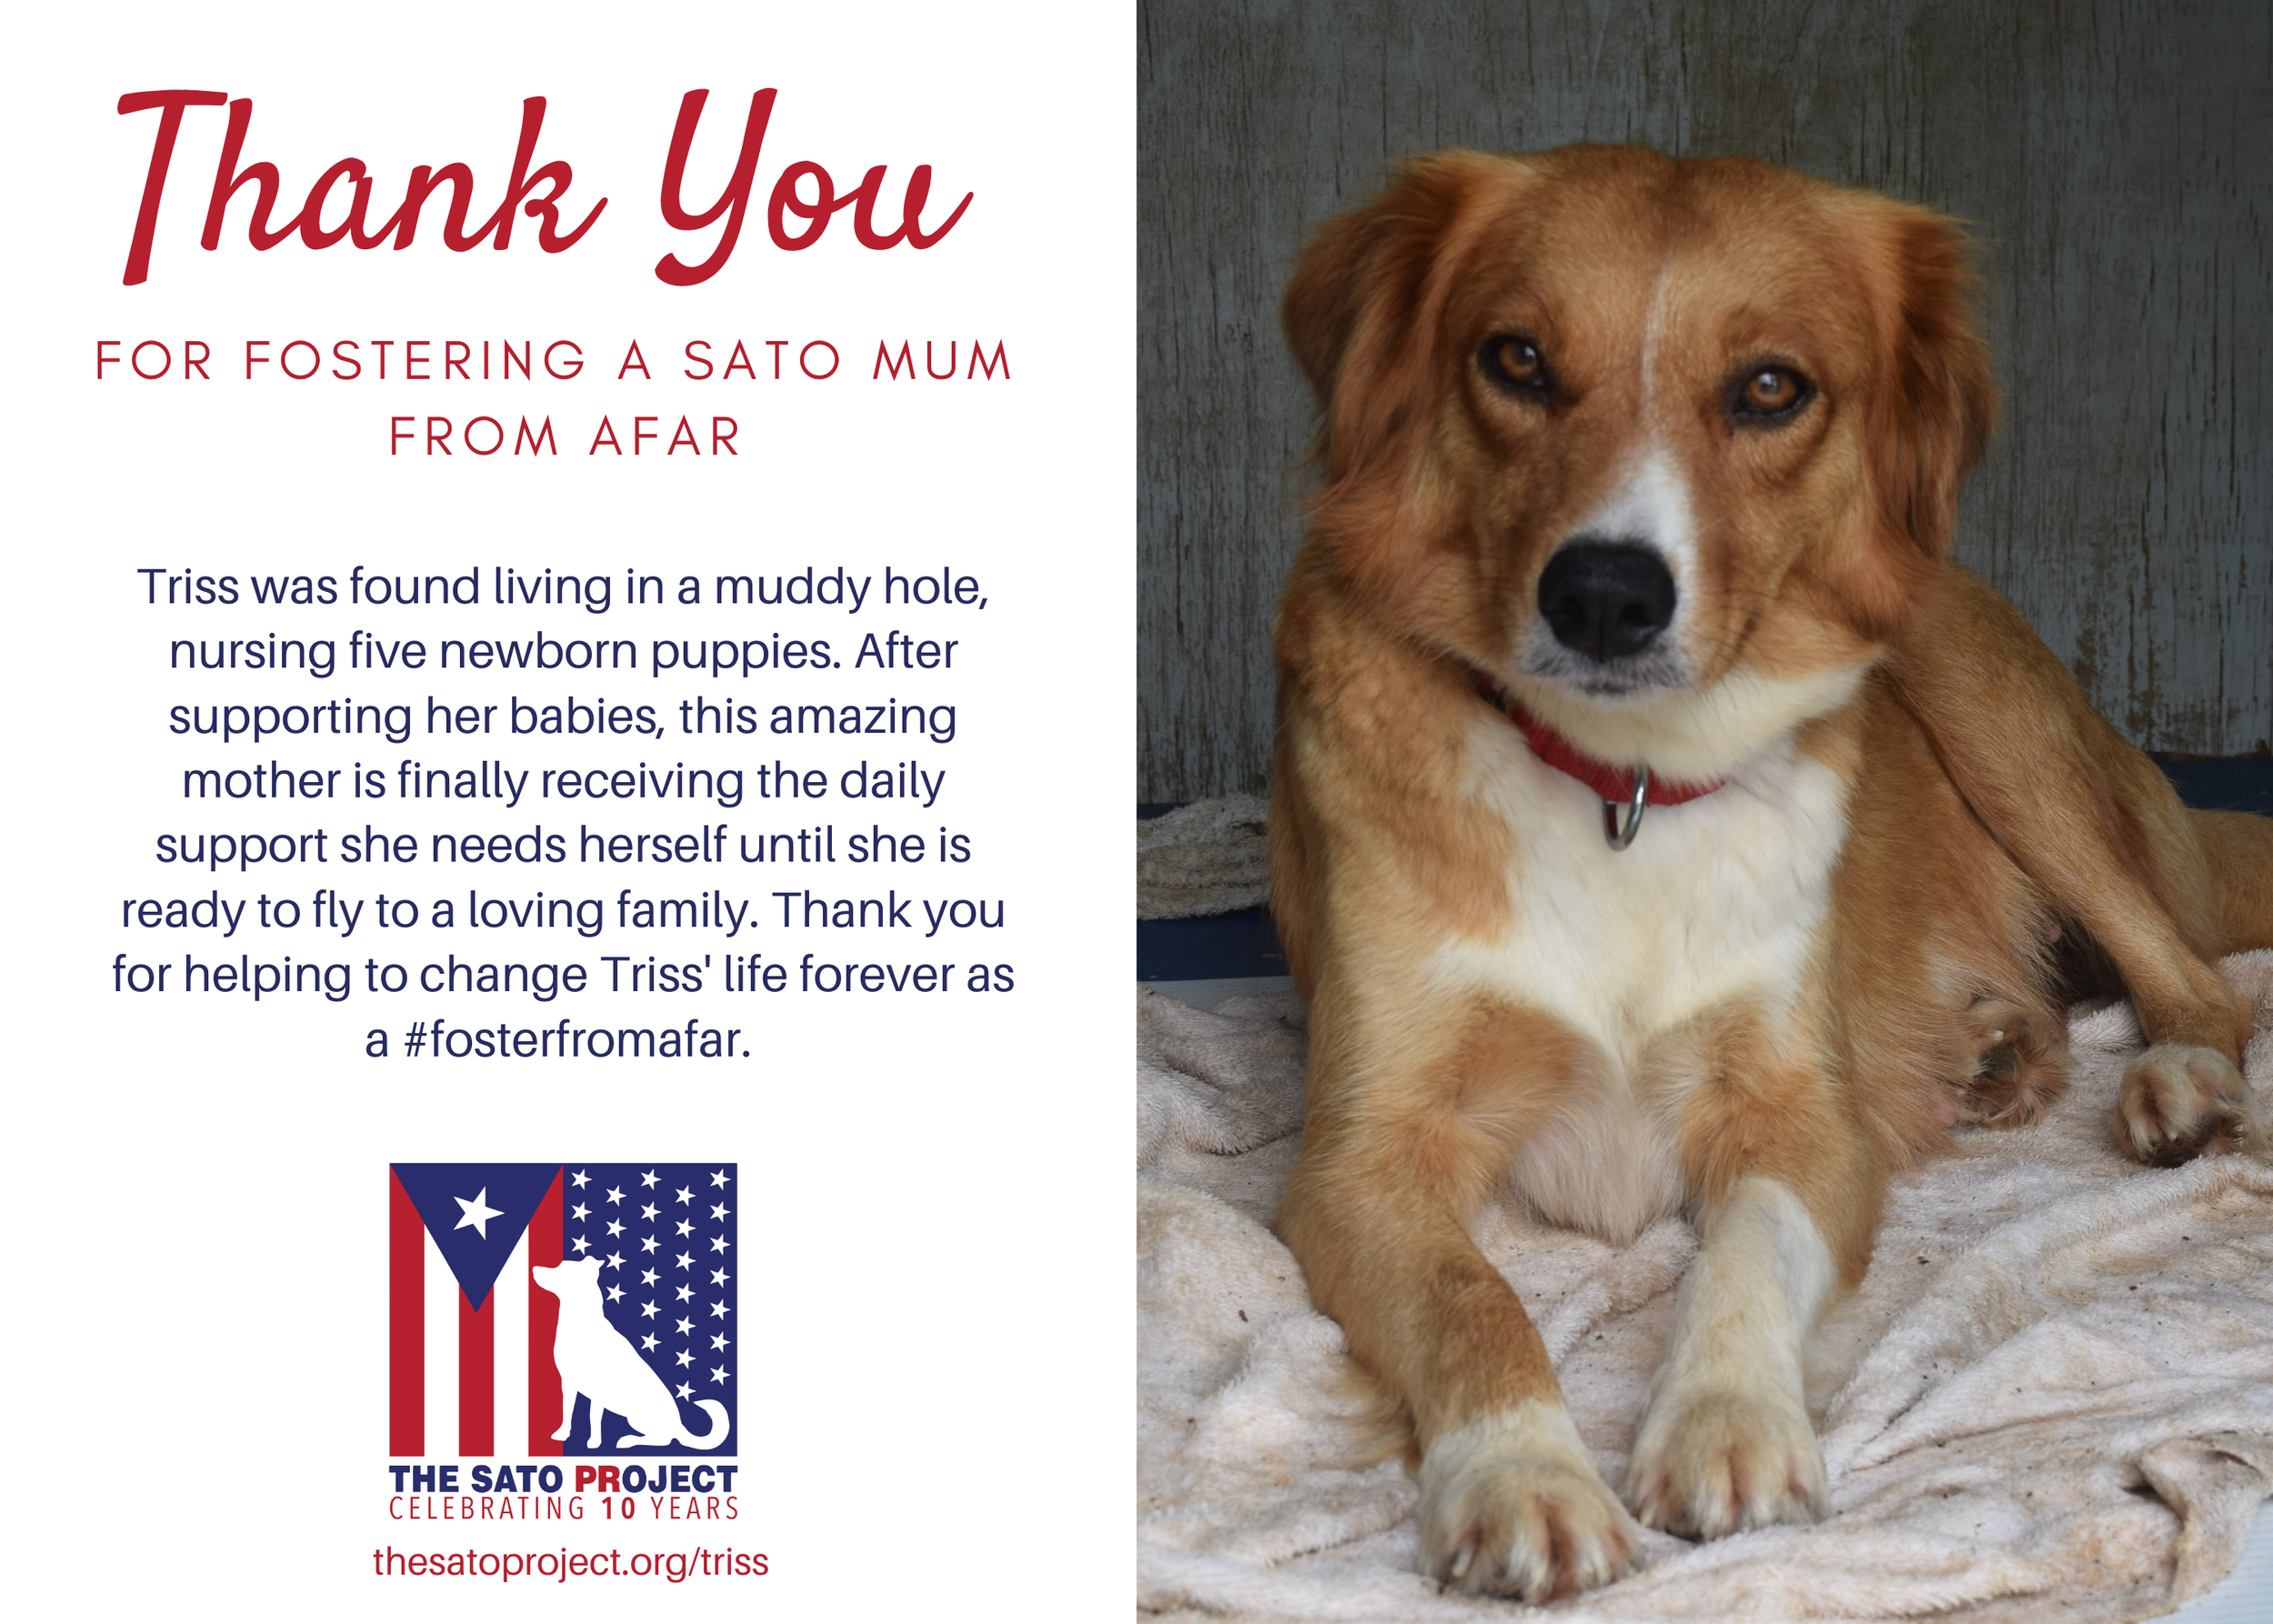 You'll receive this digital postcard to save or print to think of your foster dog every day. 